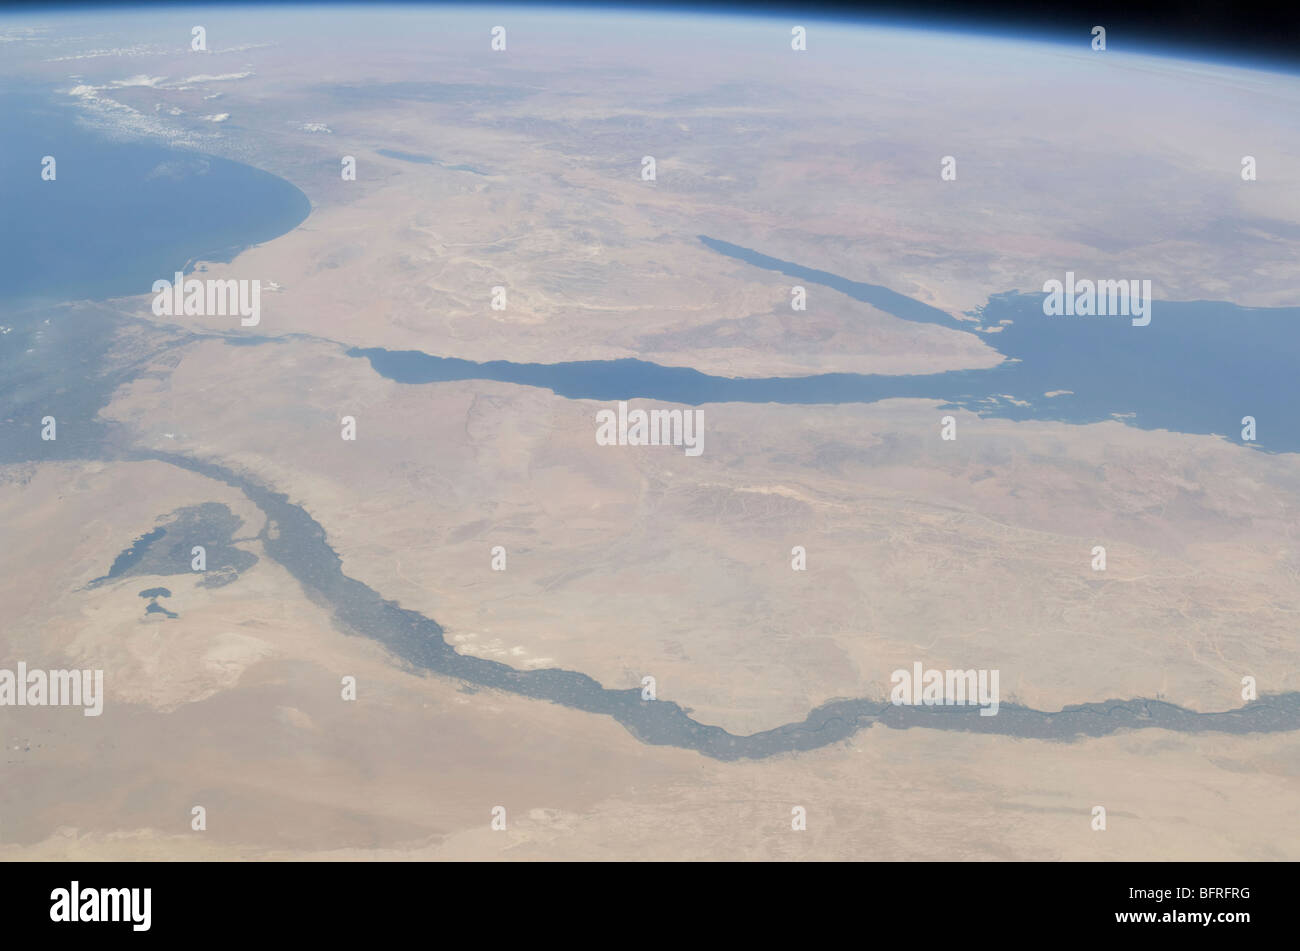 Aerial view of the Egypt and the Sinai Peninsula along with part of the Mediterranean Sea and Red Sea. Stock Photo